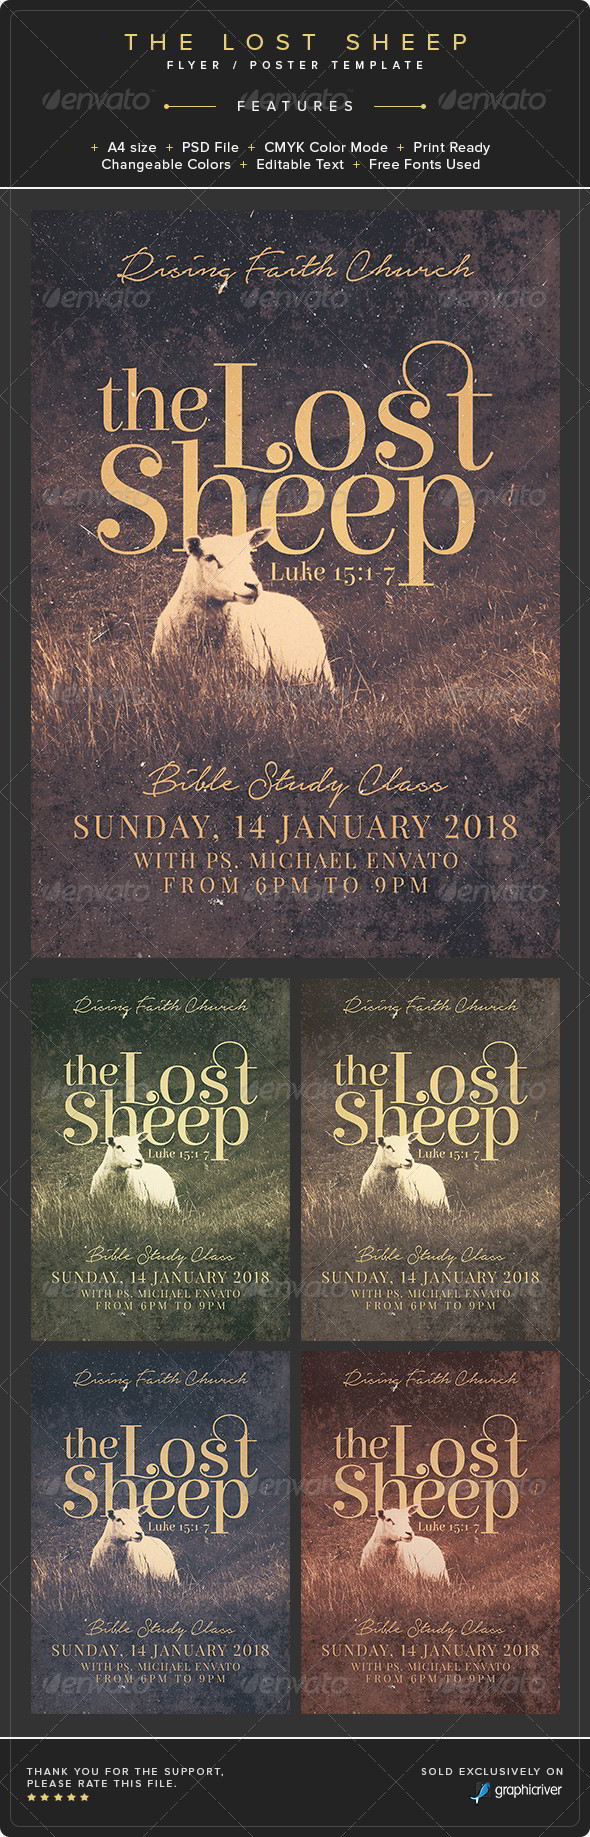 The lost sheep flyer preview